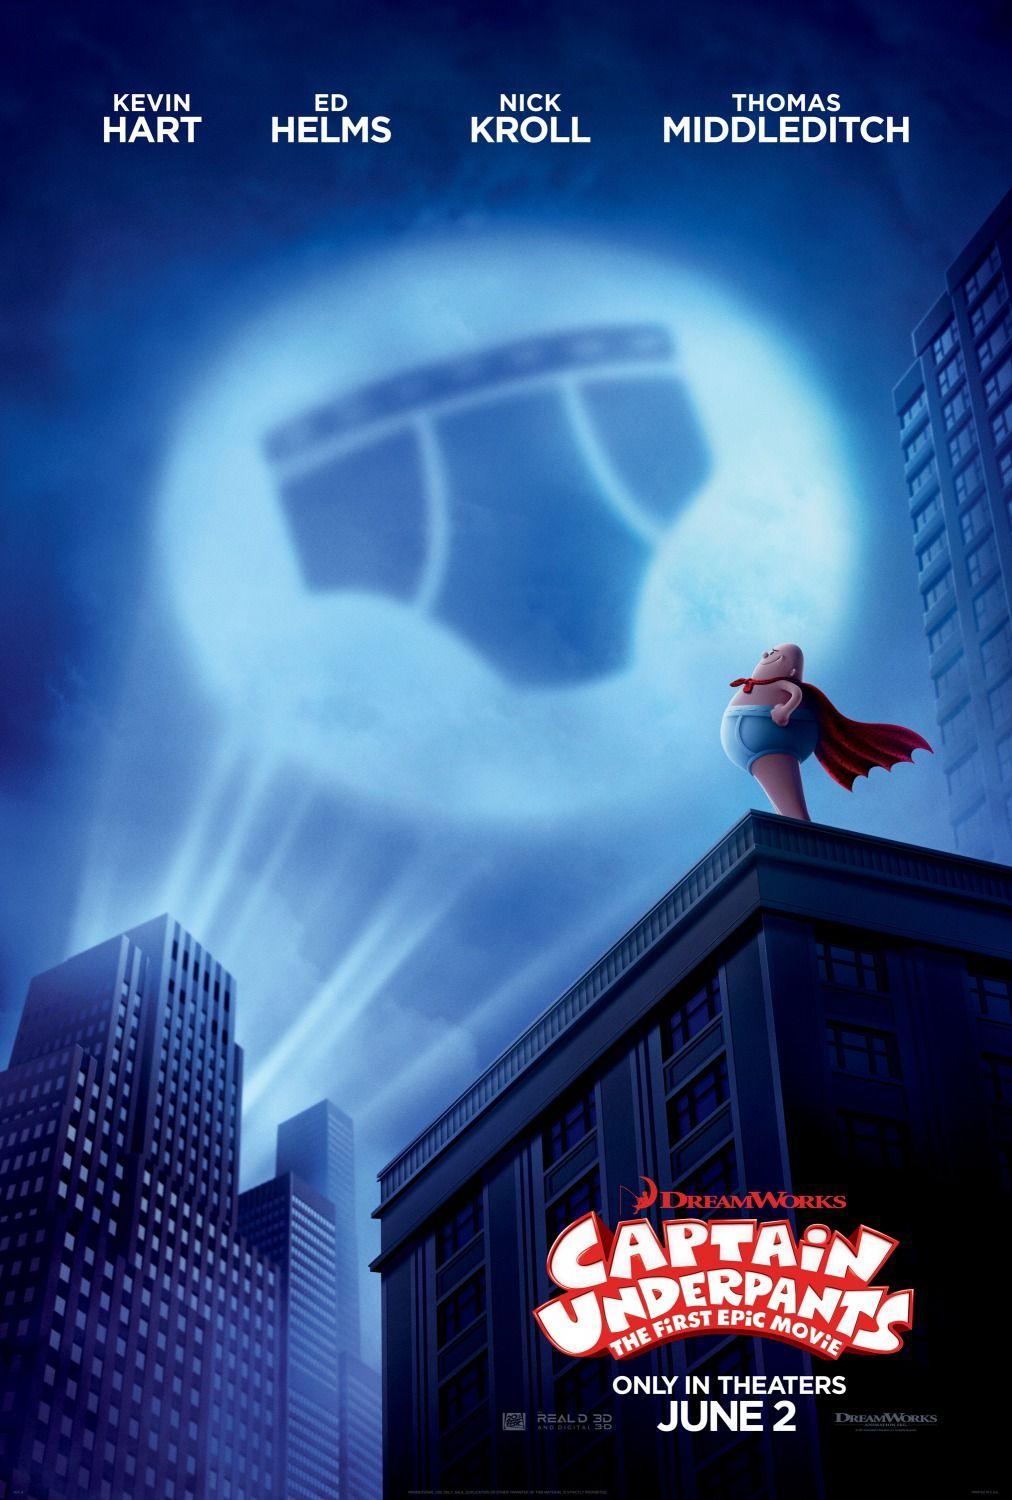 Captain Underpants: The First Epic Movie 2017 Movie Posters